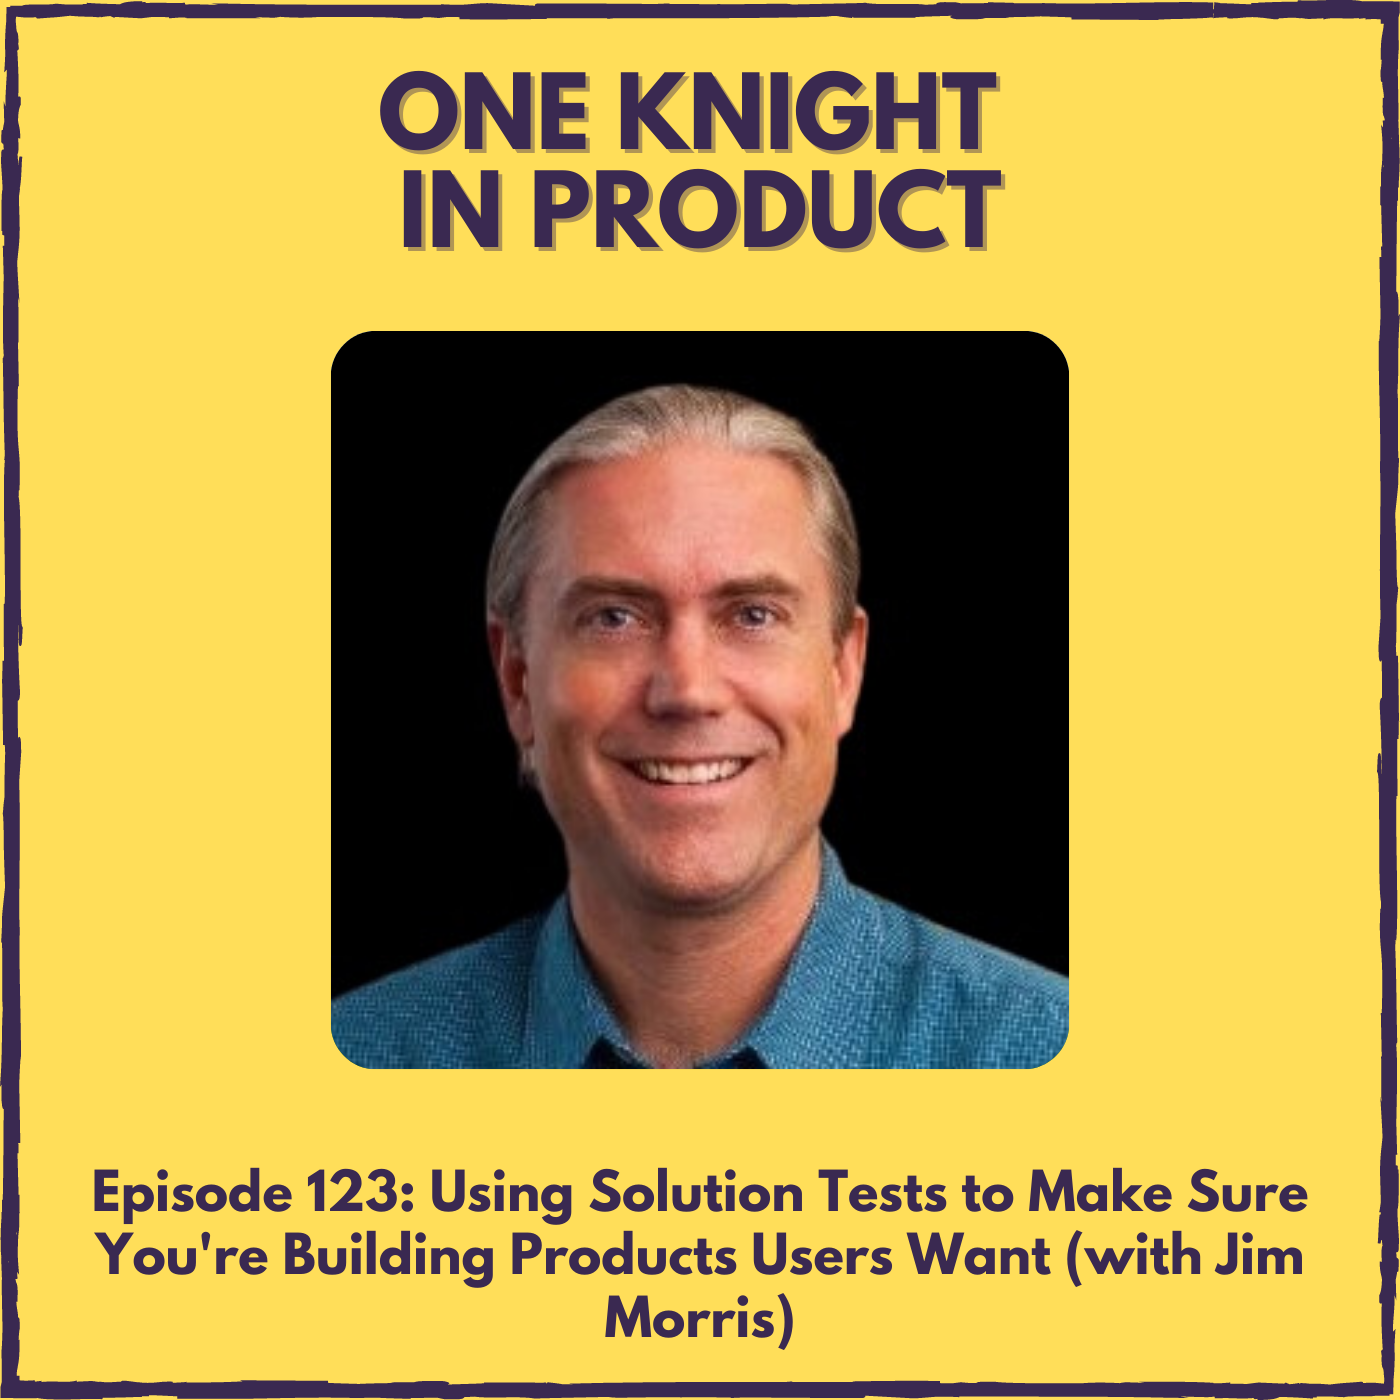 Using Solution Tests to Make Sure You’re Building Products Users Want (with Jim Morris, Founder @ Product Discovery Group)